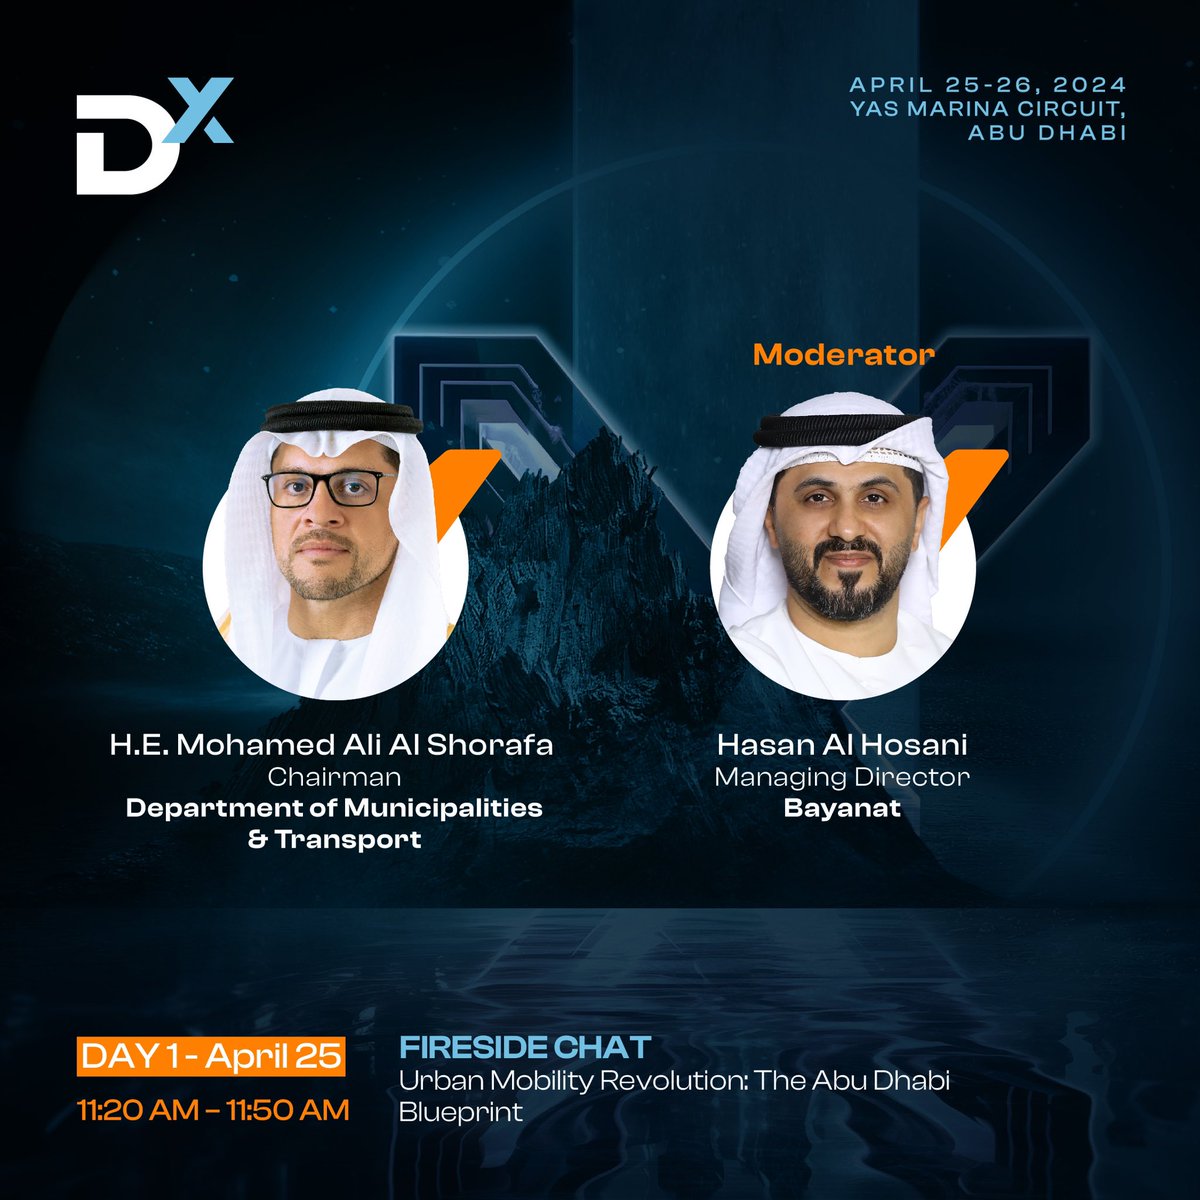 Join us for an engaging fireside chat about the urban mobility revolution: The Abu Dhabi Blueprint🔥 Don't miss out on this exclusive session! 📅 April 25-26, 2024 📍 Yas Marina Circuit, Abu Dhabi @Bayanatg42 @AbuDhabiDMT @InvestAbuDhabi @saviabudhabi